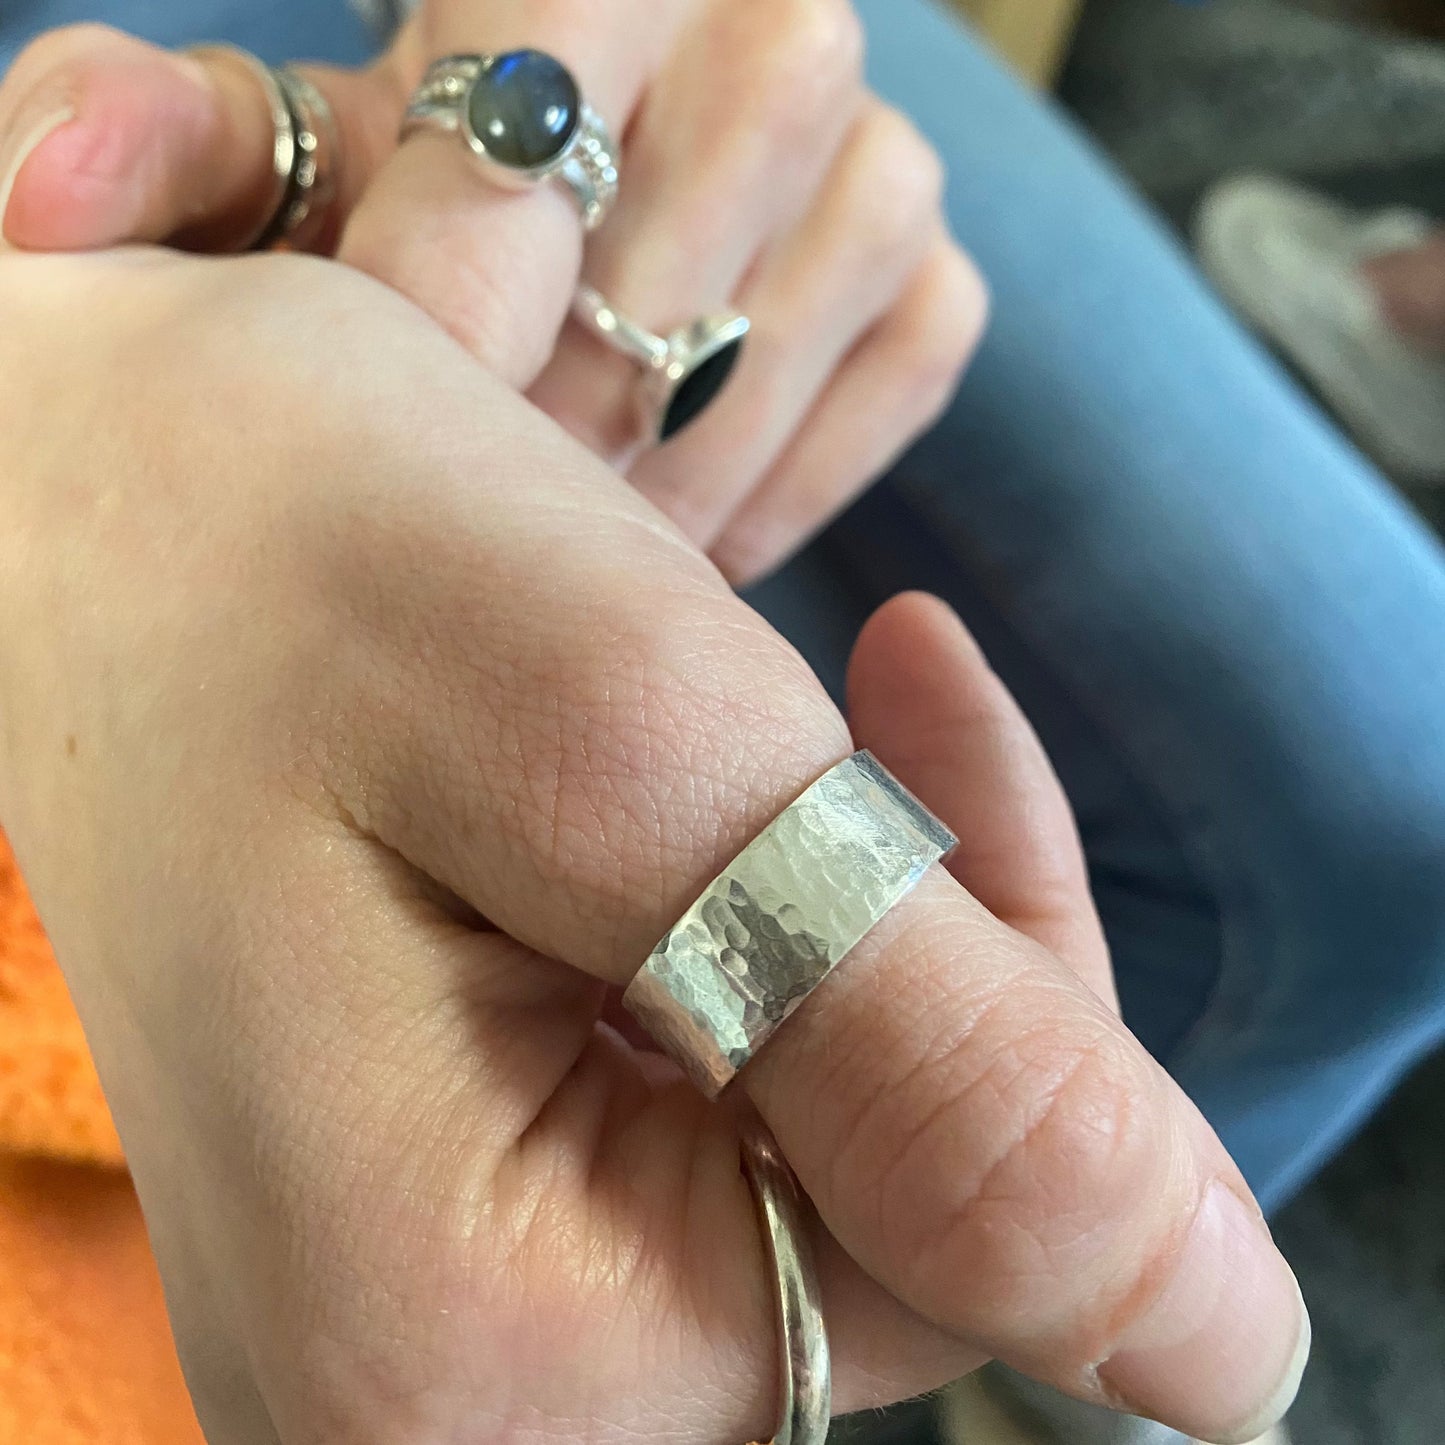 Adult & Teen Ring Making Workshop - Wednesday 21st August 11-2pm